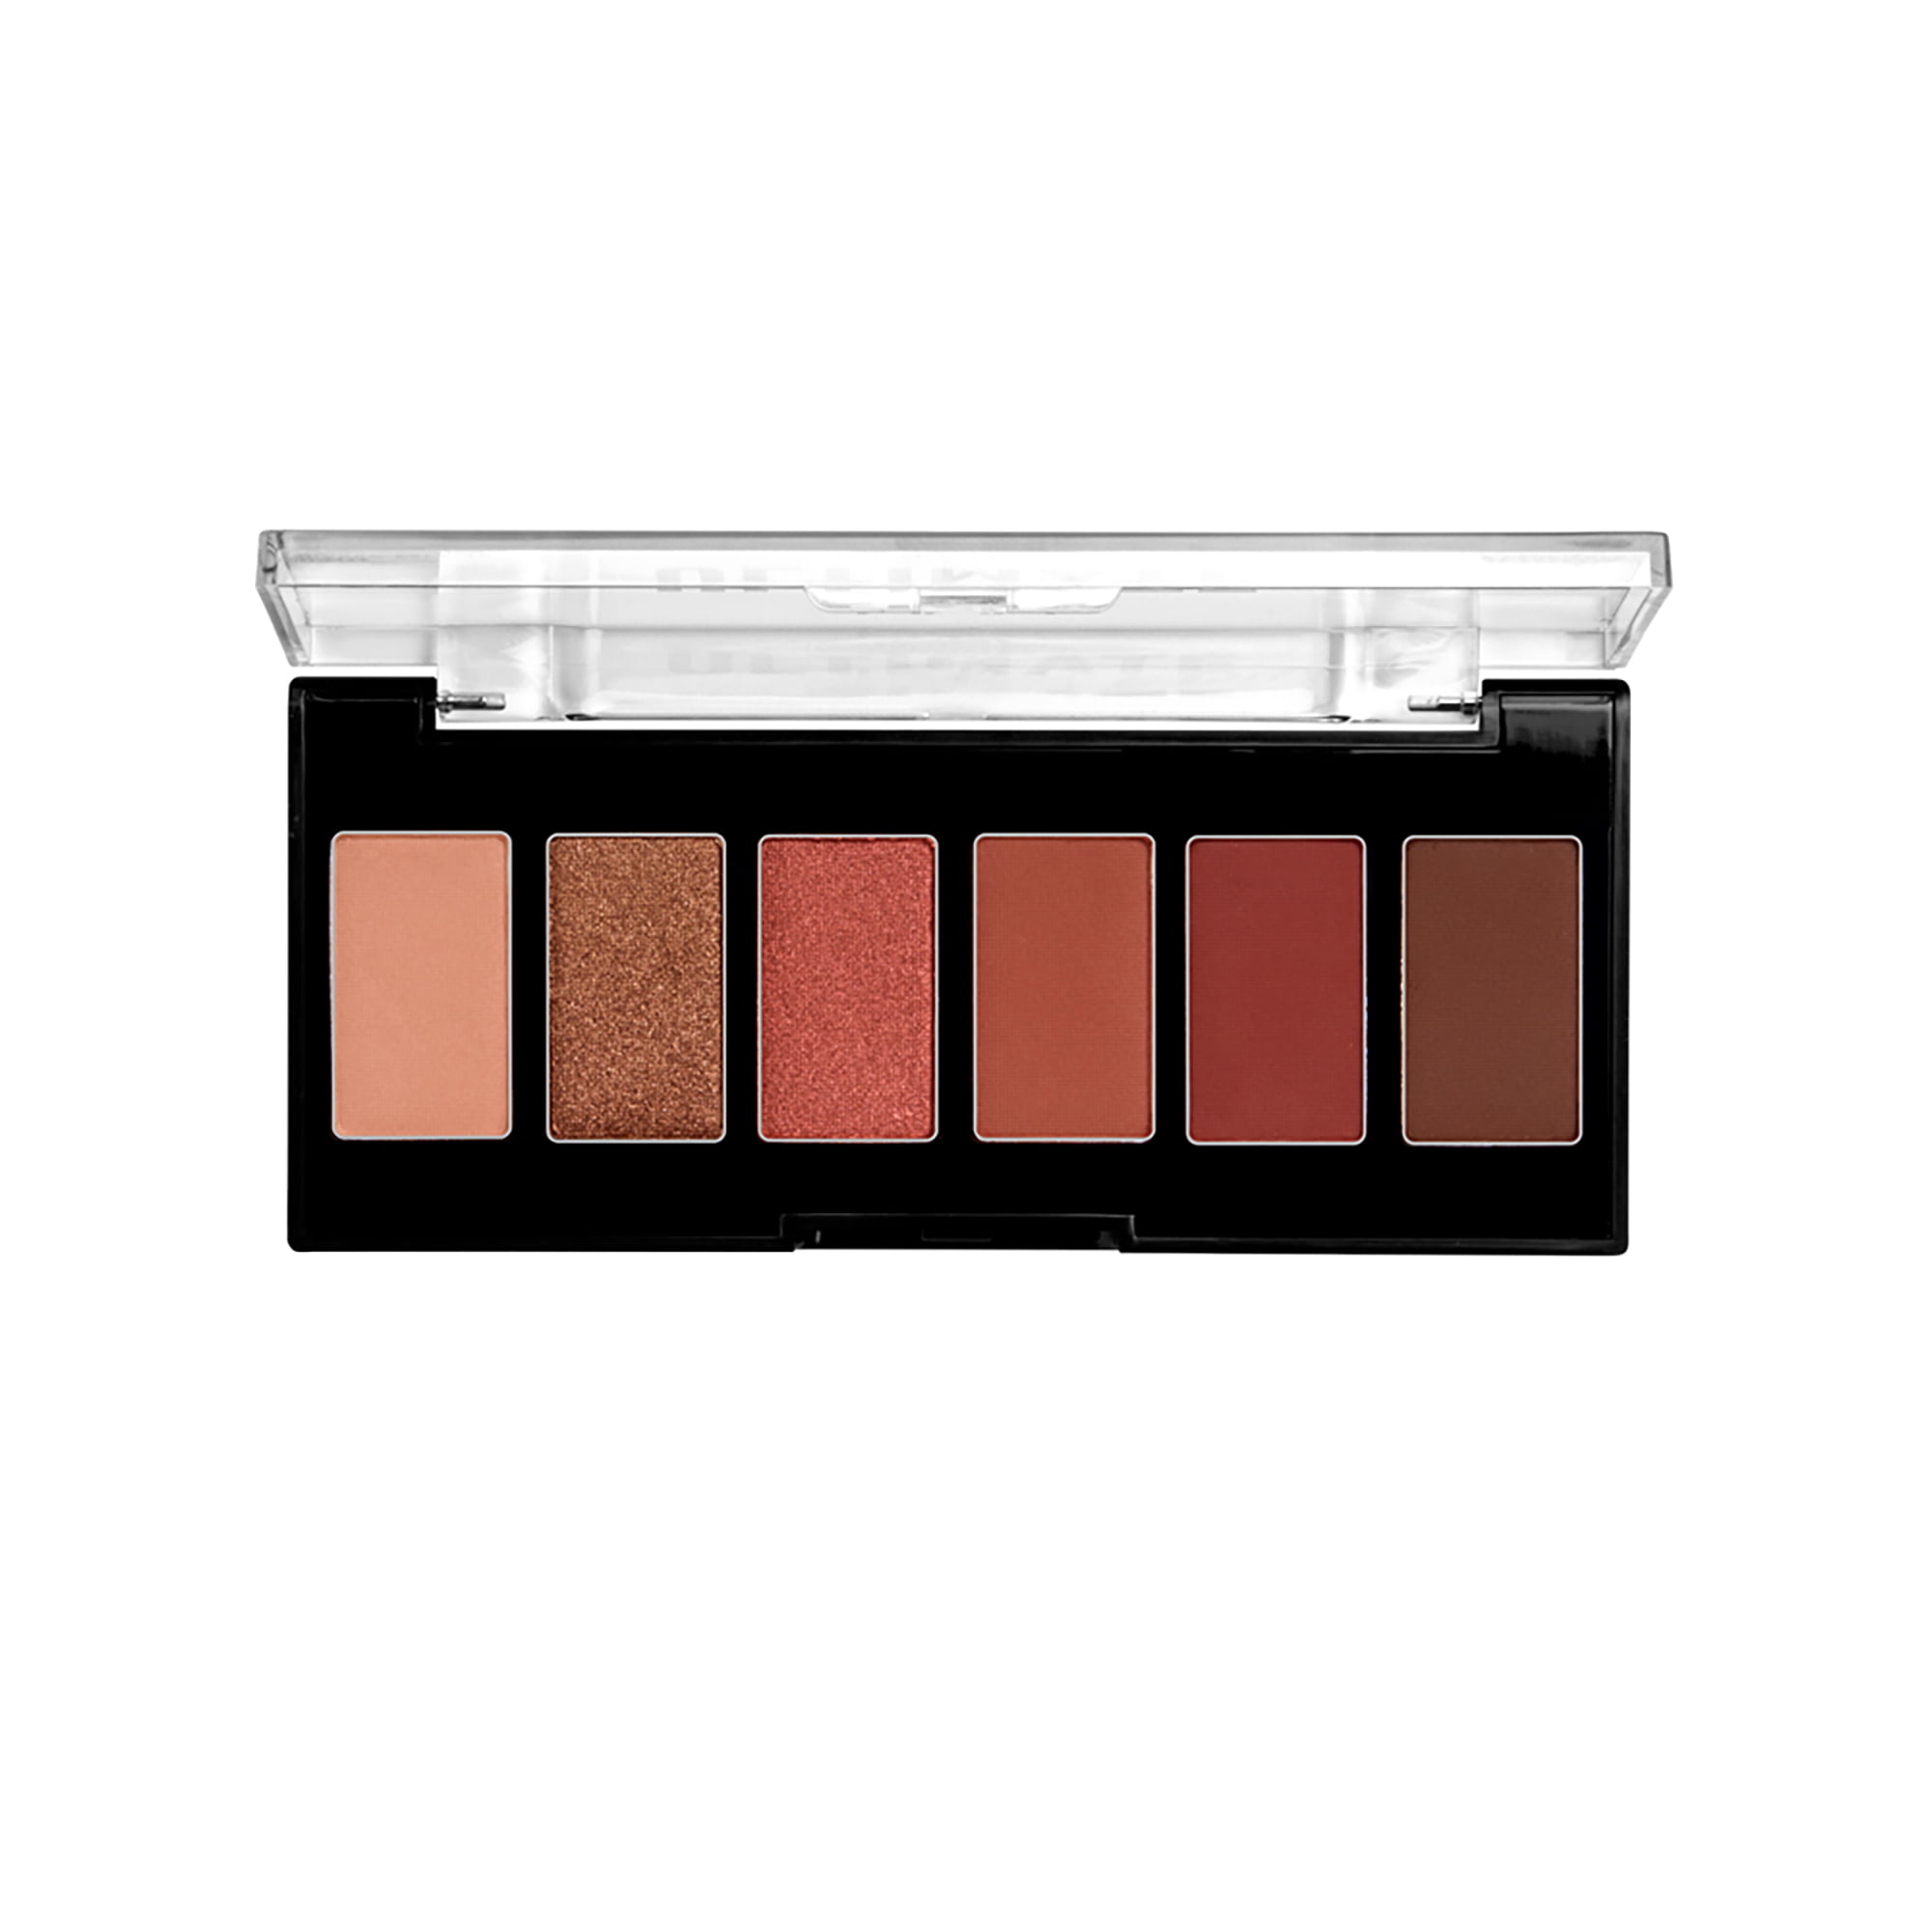 NYX Professional Makeup Ultimate Edit Petite Shadow Palette, Warm Neutrals - image 2 of 7